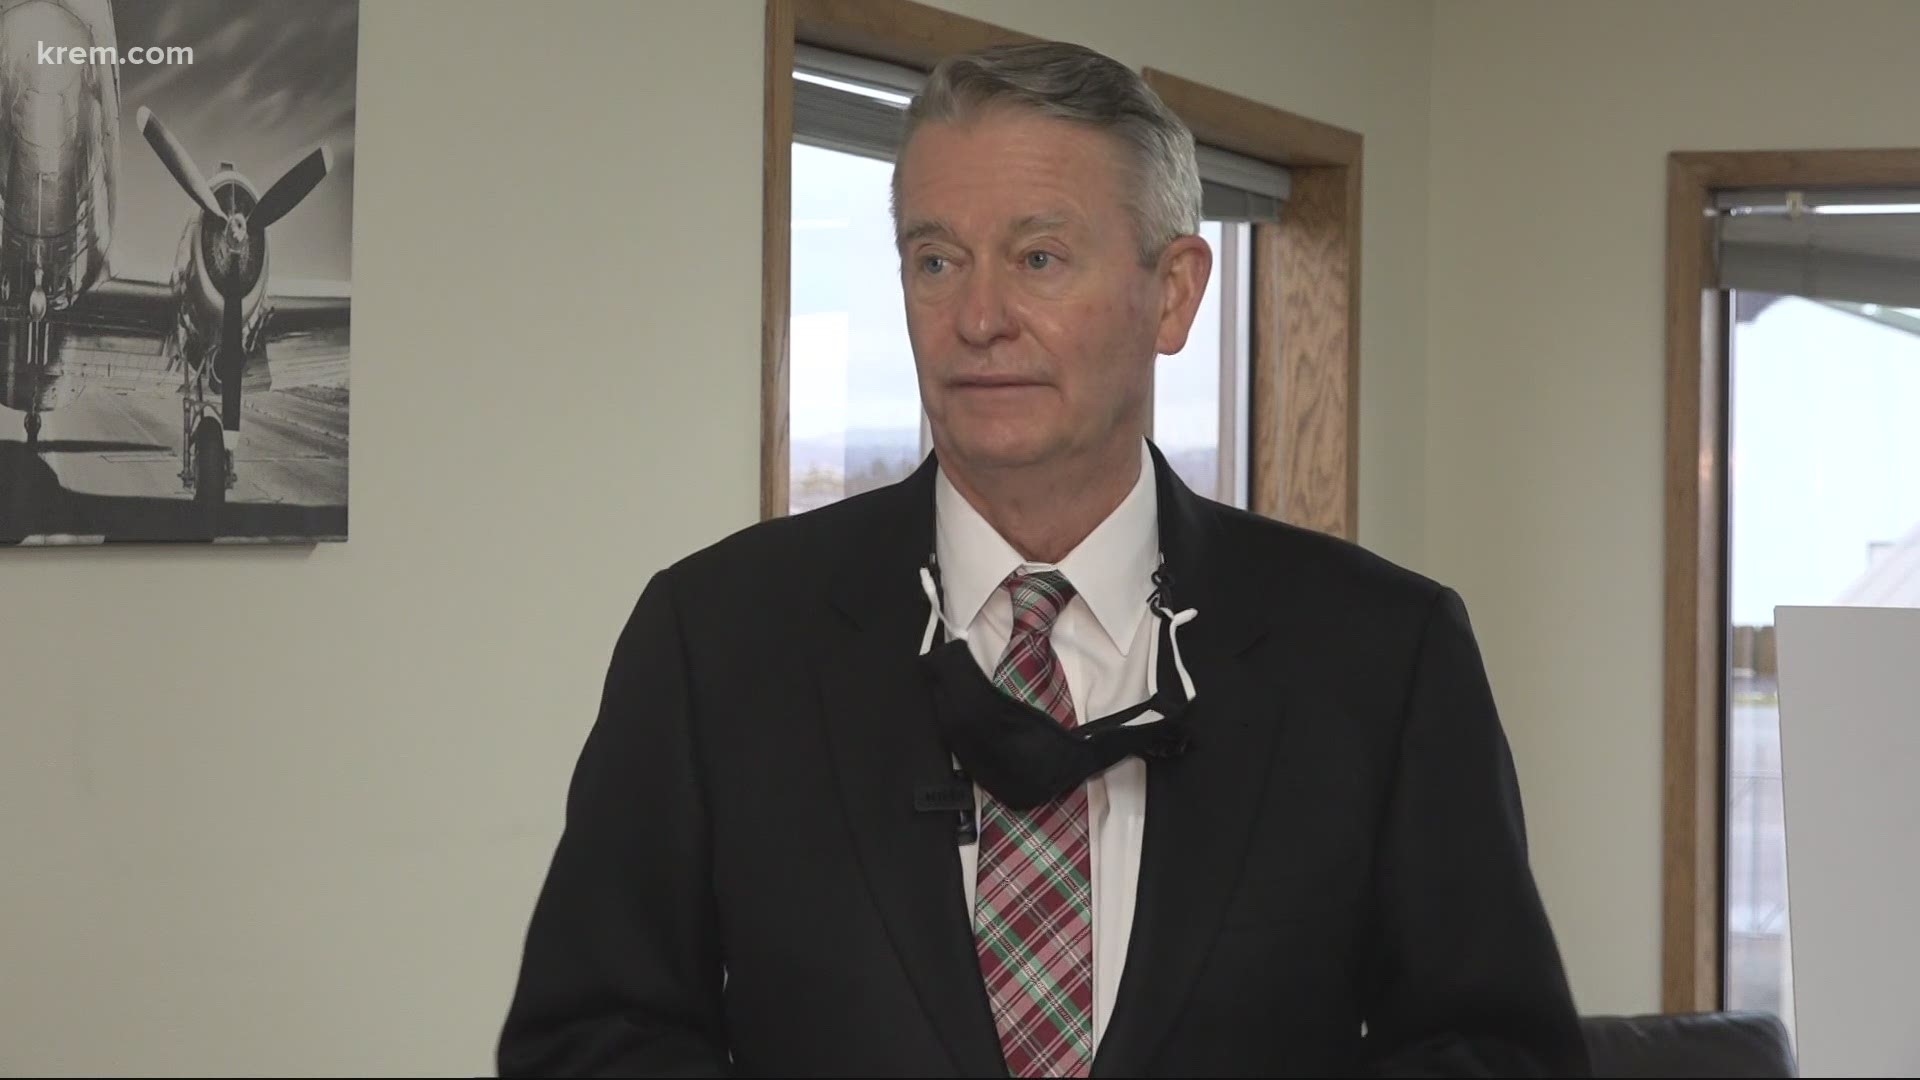 Idaho's governor has refused to require mask-wearing in the state, even as Kootenai Health has so many COVID patients it is suspending elective surgeries.